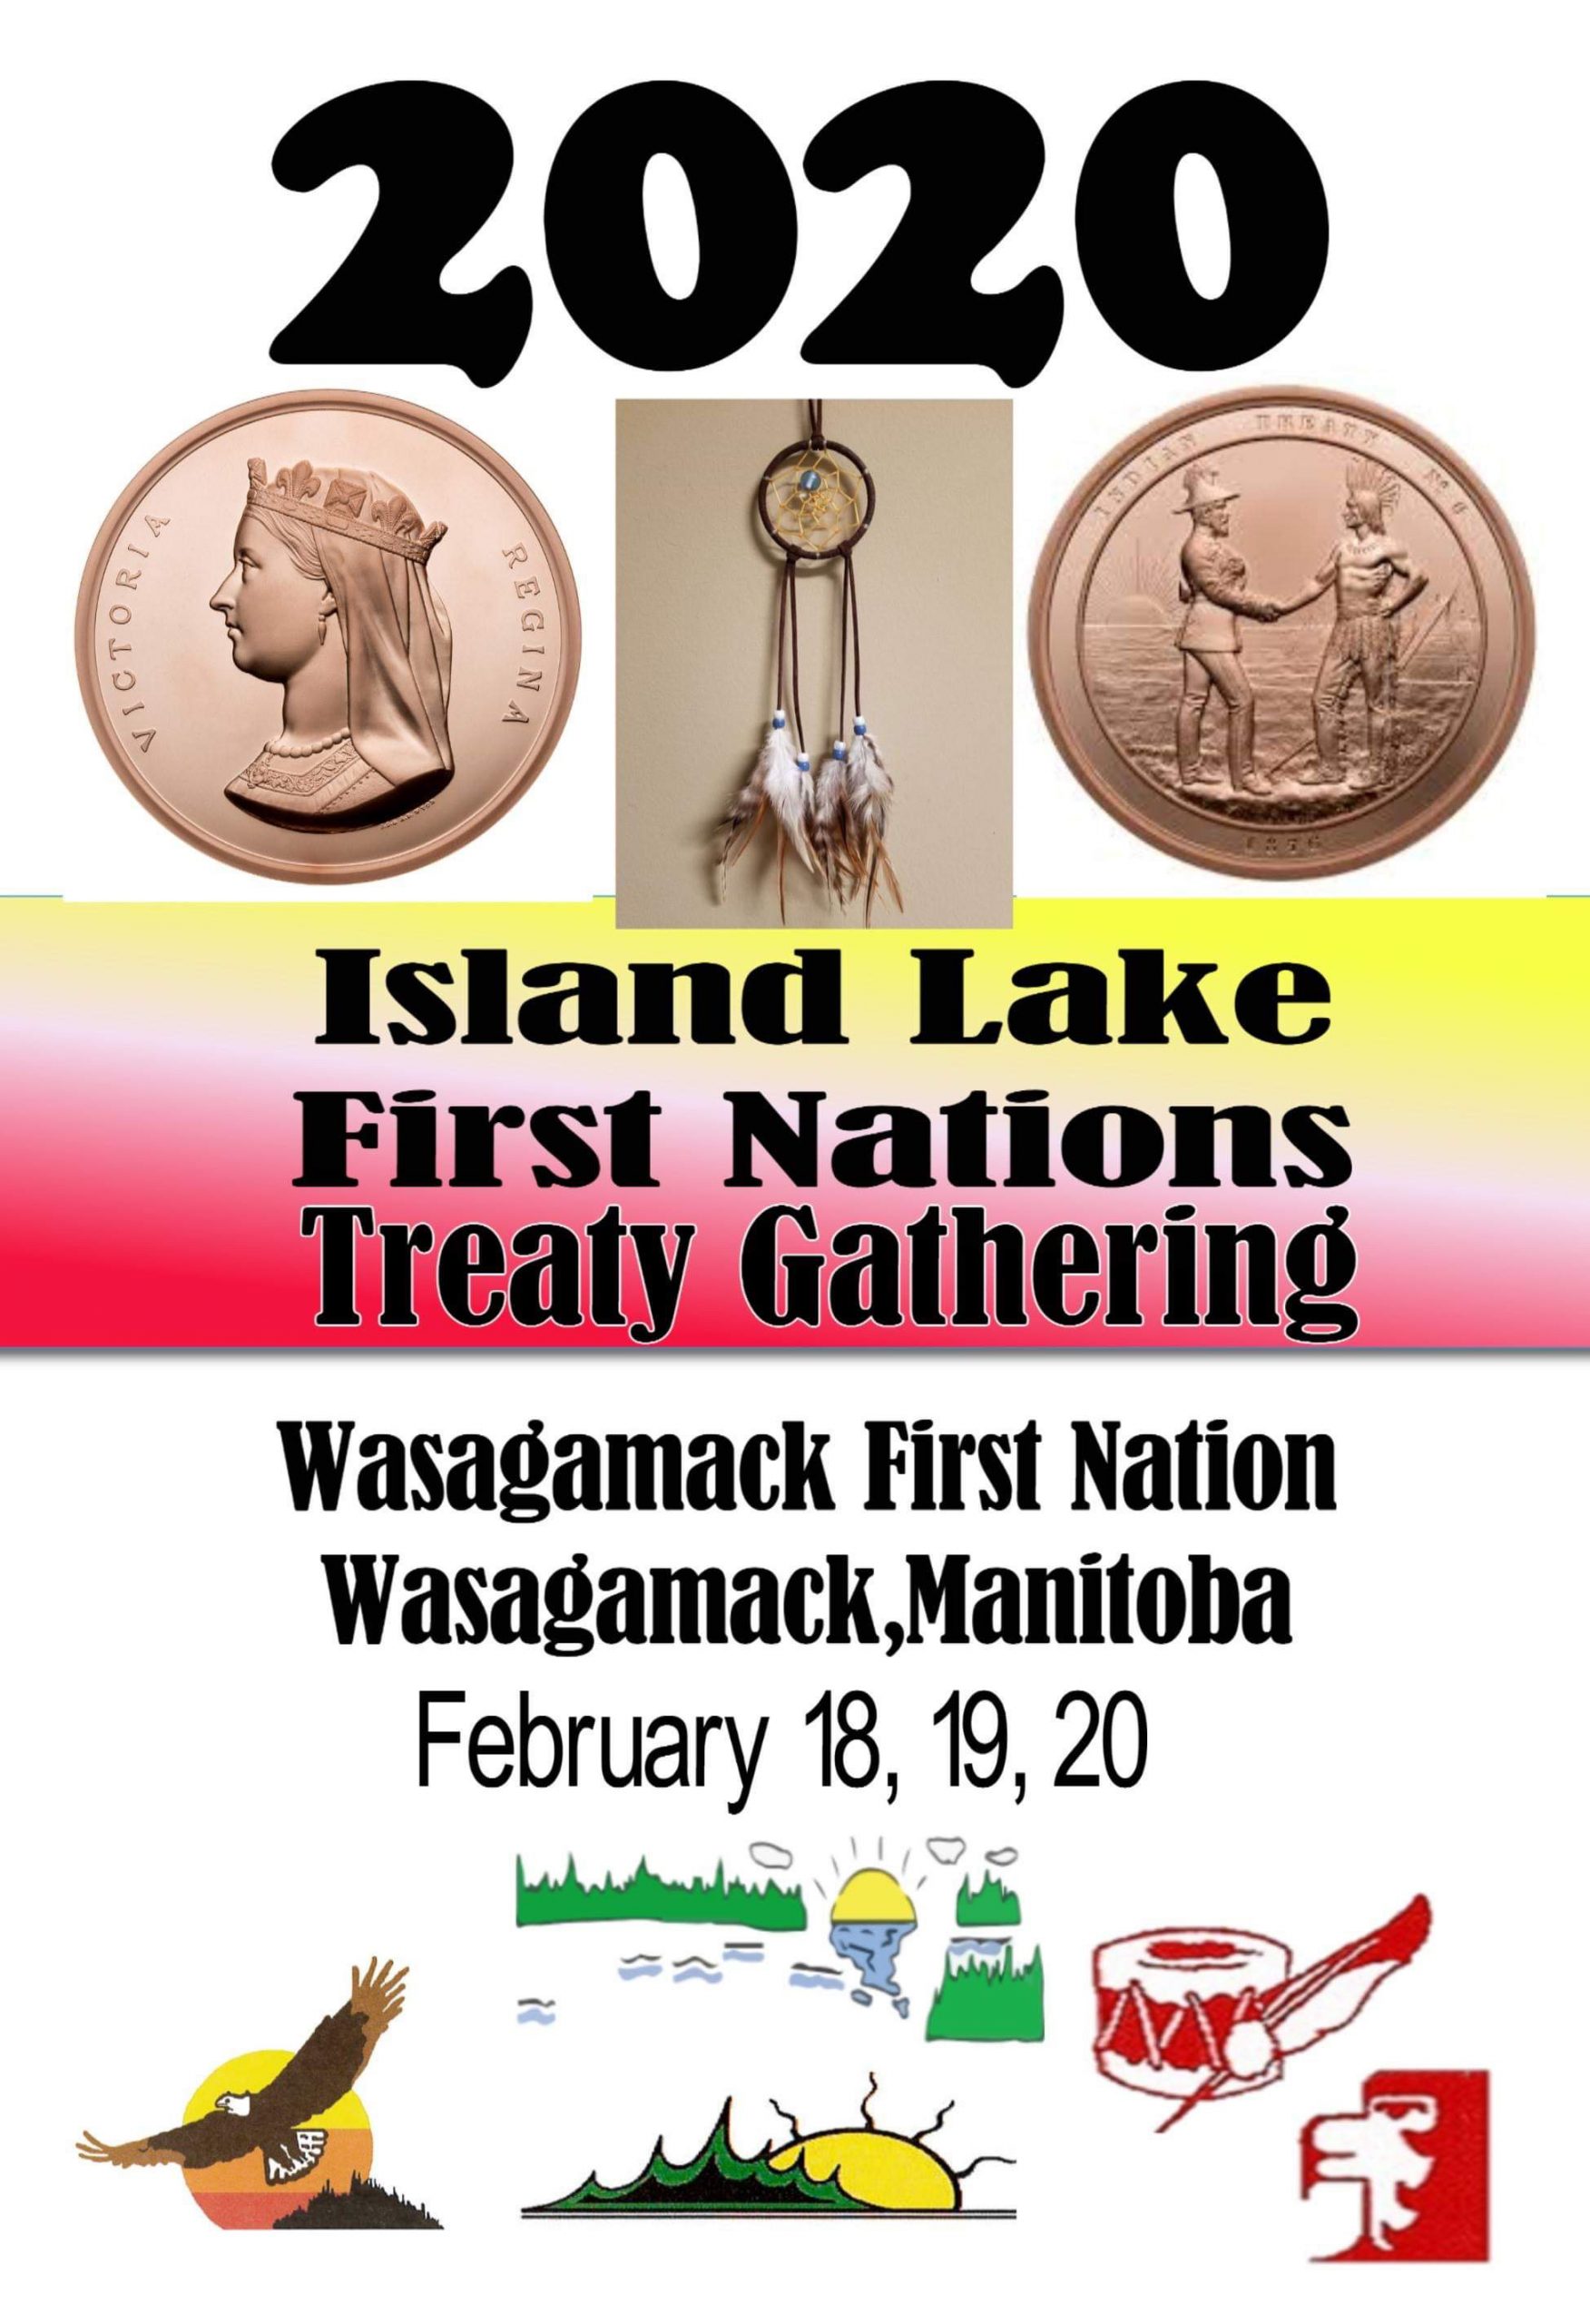 You are currently viewing Island Lake First Nations Treaty Gathering – February 18, 19, 20, 2020